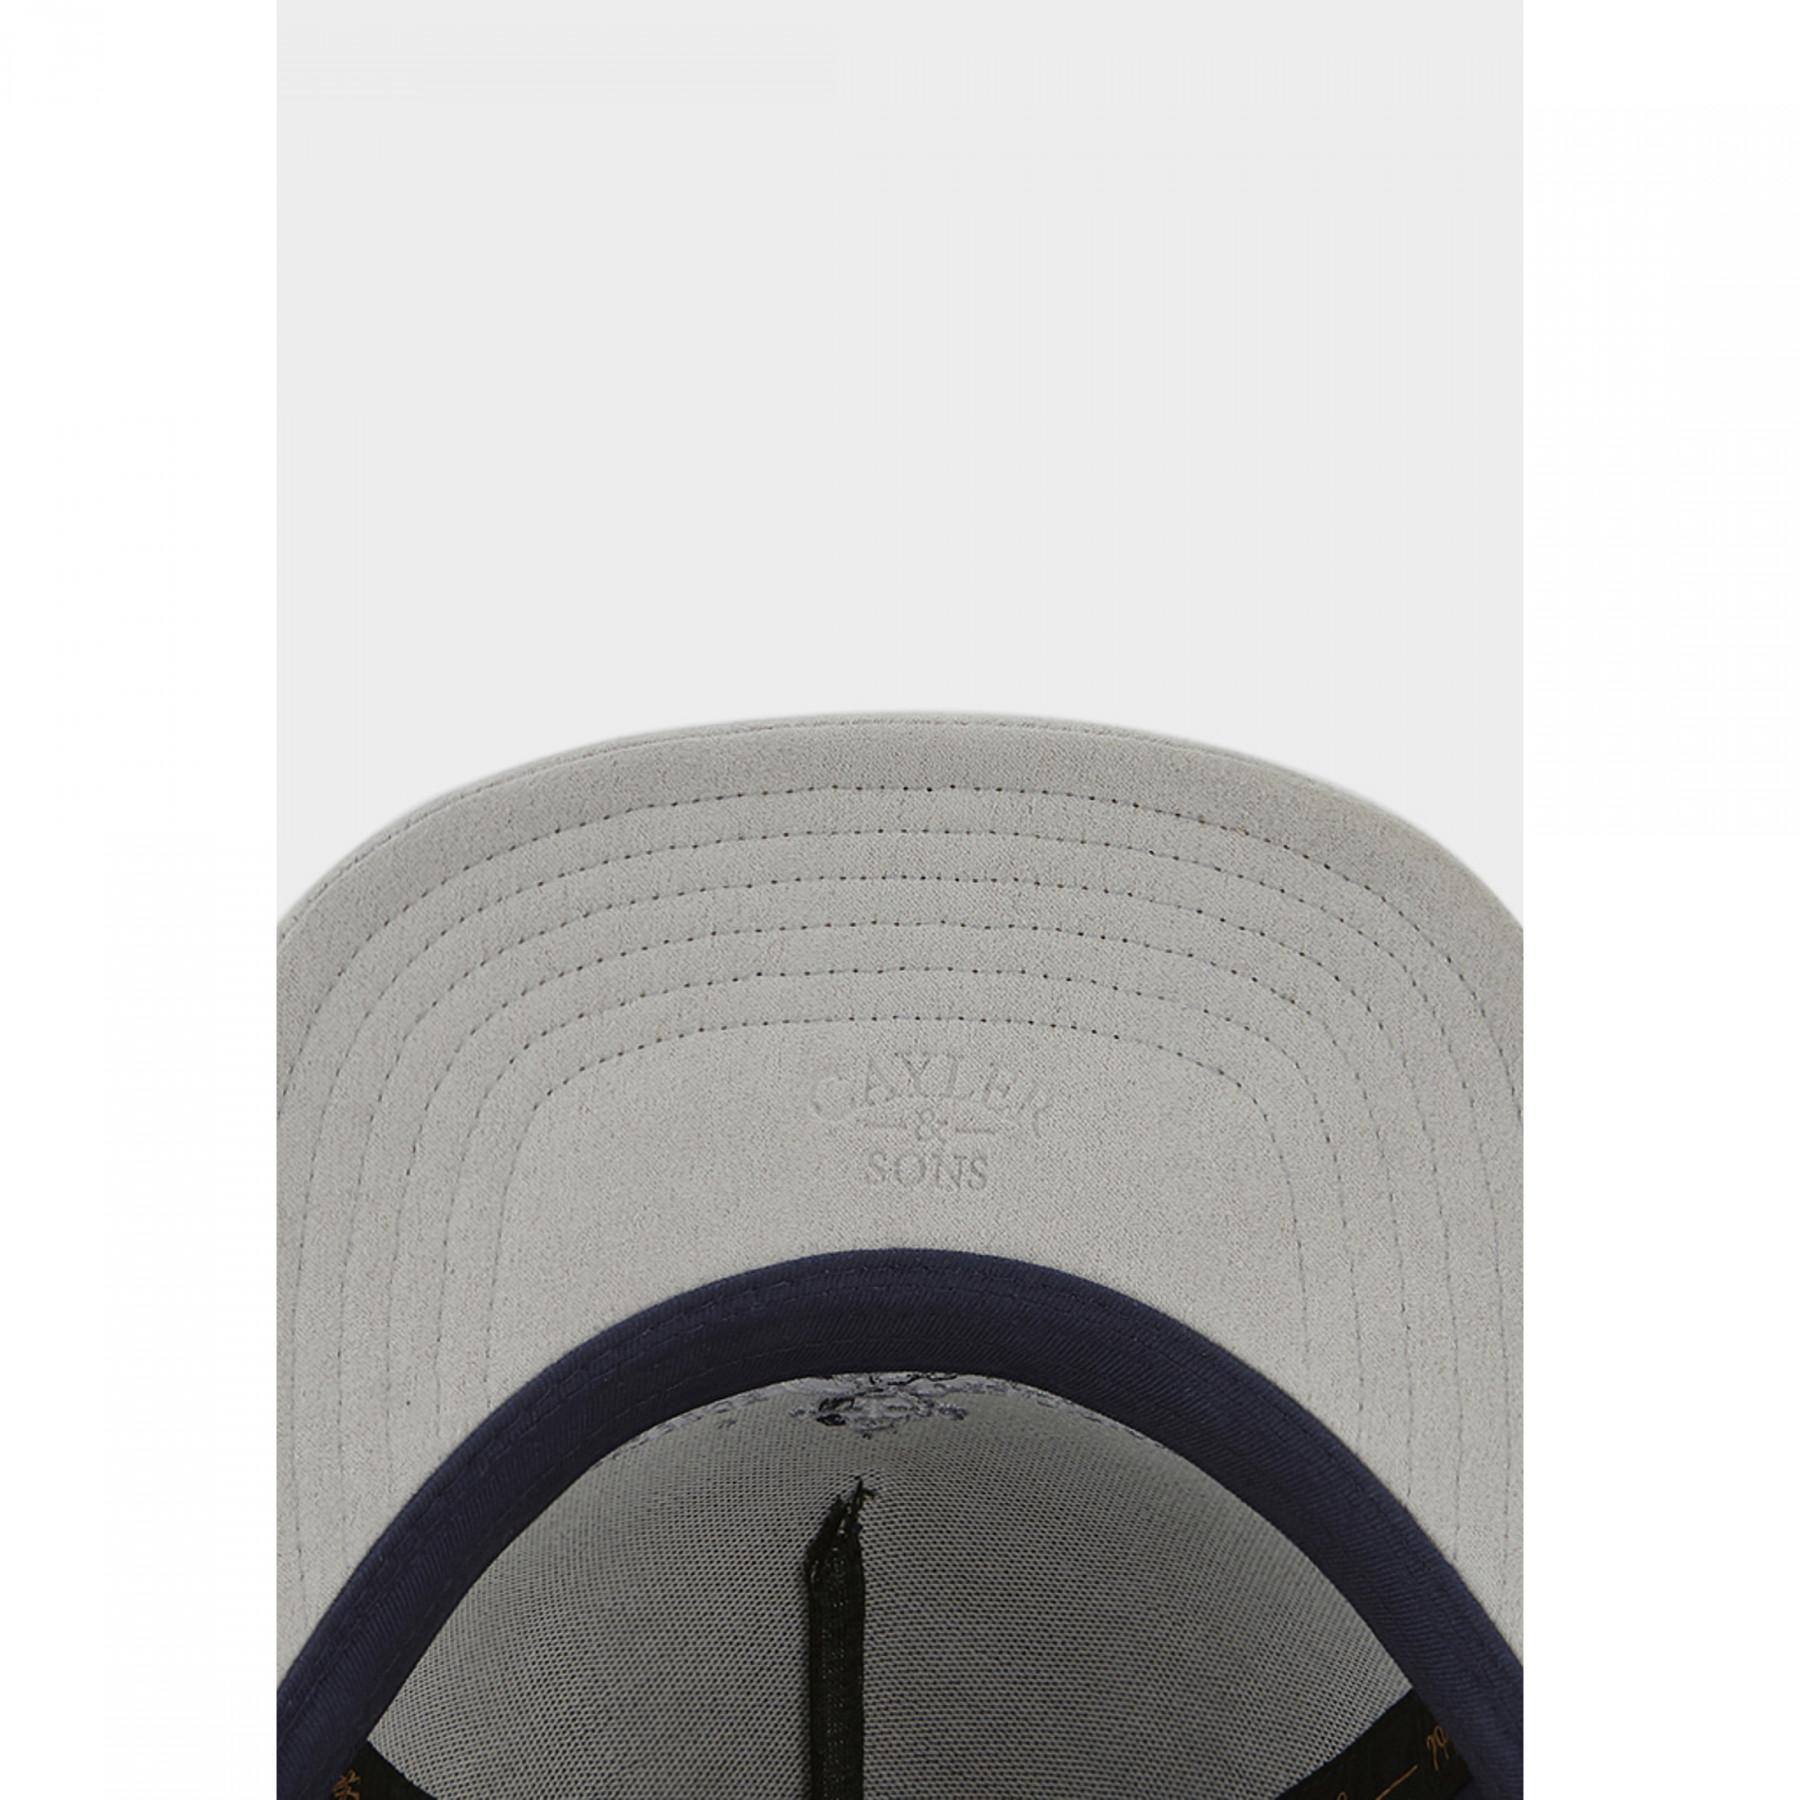 Casquette Cayler & Sons cl tradition